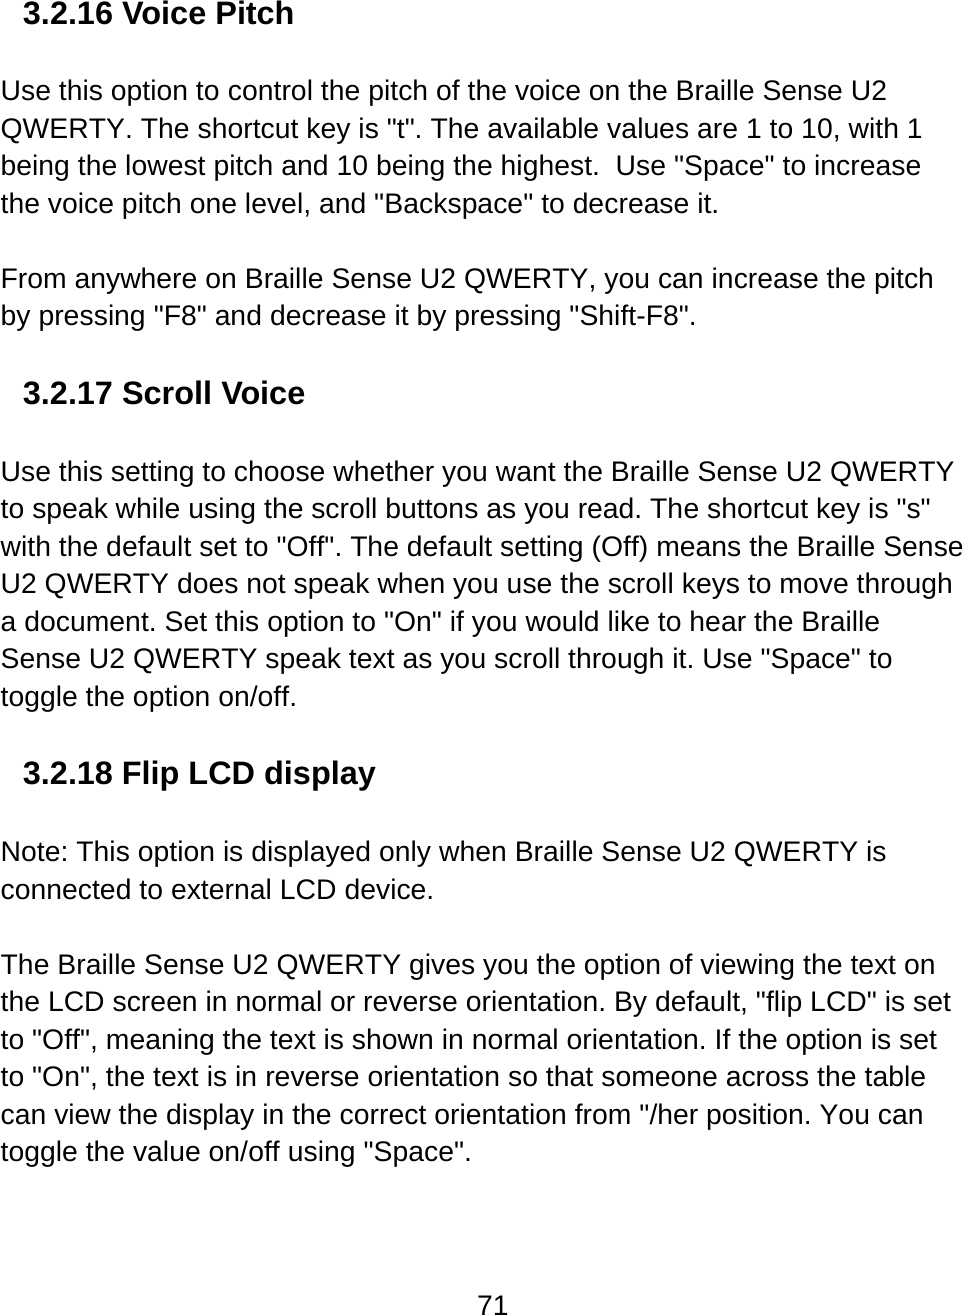 71  3.2.16 Voice Pitch  Use this option to control the pitch of the voice on the Braille Sense U2 QWERTY. The shortcut key is &quot;t&quot;. The available values are 1 to 10, with 1 being the lowest pitch and 10 being the highest.  Use &quot;Space&quot; to increase the voice pitch one level, and &quot;Backspace&quot; to decrease it.    From anywhere on Braille Sense U2 QWERTY, you can increase the pitch by pressing &quot;F8&quot; and decrease it by pressing &quot;Shift-F8&quot;.  3.2.17 Scroll Voice  Use this setting to choose whether you want the Braille Sense U2 QWERTY to speak while using the scroll buttons as you read. The shortcut key is &quot;s&quot; with the default set to &quot;Off&quot;. The default setting (Off) means the Braille Sense U2 QWERTY does not speak when you use the scroll keys to move through a document. Set this option to &quot;On&quot; if you would like to hear the Braille Sense U2 QWERTY speak text as you scroll through it. Use &quot;Space&quot; to toggle the option on/off.   3.2.18 Flip LCD display  Note: This option is displayed only when Braille Sense U2 QWERTY is connected to external LCD device.  The Braille Sense U2 QWERTY gives you the option of viewing the text on the LCD screen in normal or reverse orientation. By default, &quot;flip LCD&quot; is set to &quot;Off&quot;, meaning the text is shown in normal orientation. If the option is set to &quot;On&quot;, the text is in reverse orientation so that someone across the table can view the display in the correct orientation from &quot;/her position. You can toggle the value on/off using &quot;Space&quot;.   